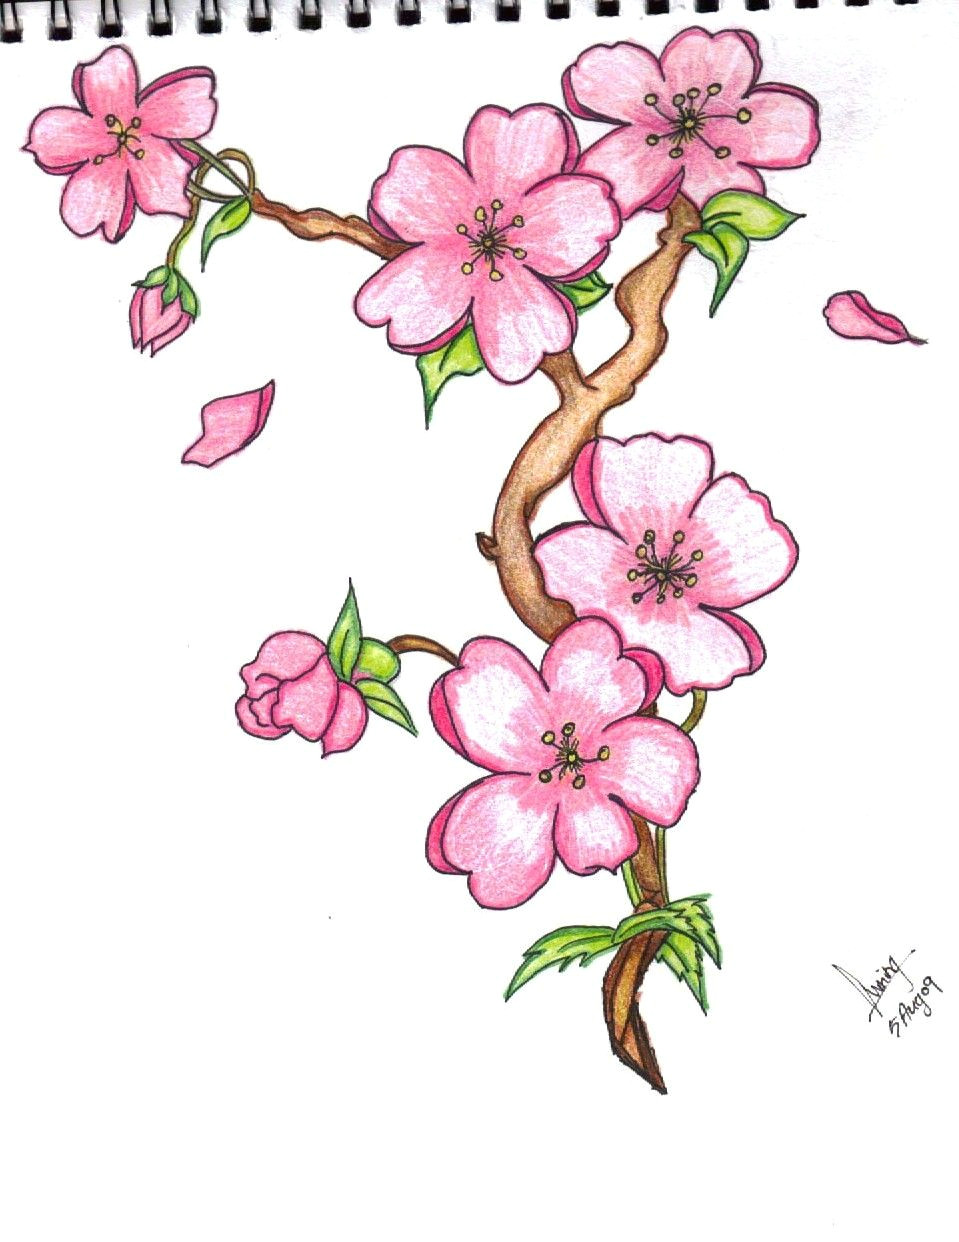 Drawing Picture Of Jasmine Flower Pin by Marvin todd On Drawing Flowers In 2019 Pinterest Drawings